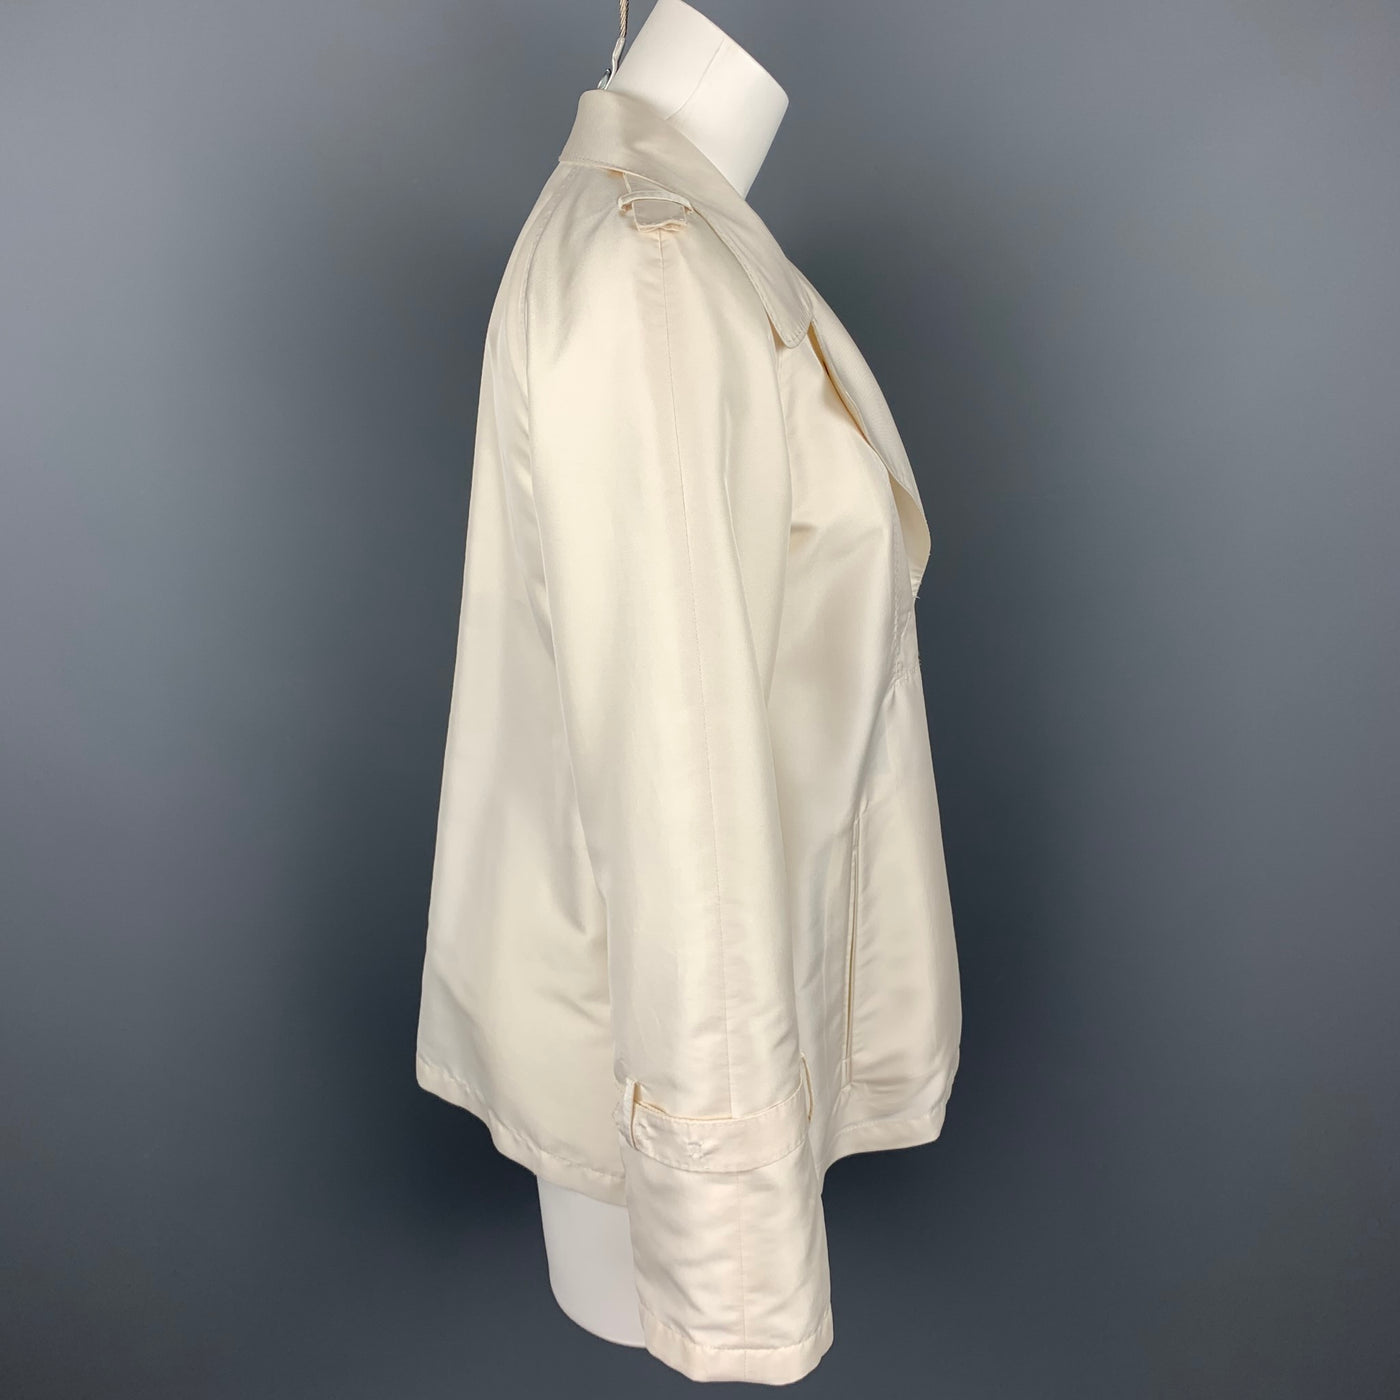 CoSTUME NATIONAL Size 2 Cream Twill Polyester A-Line Jacket